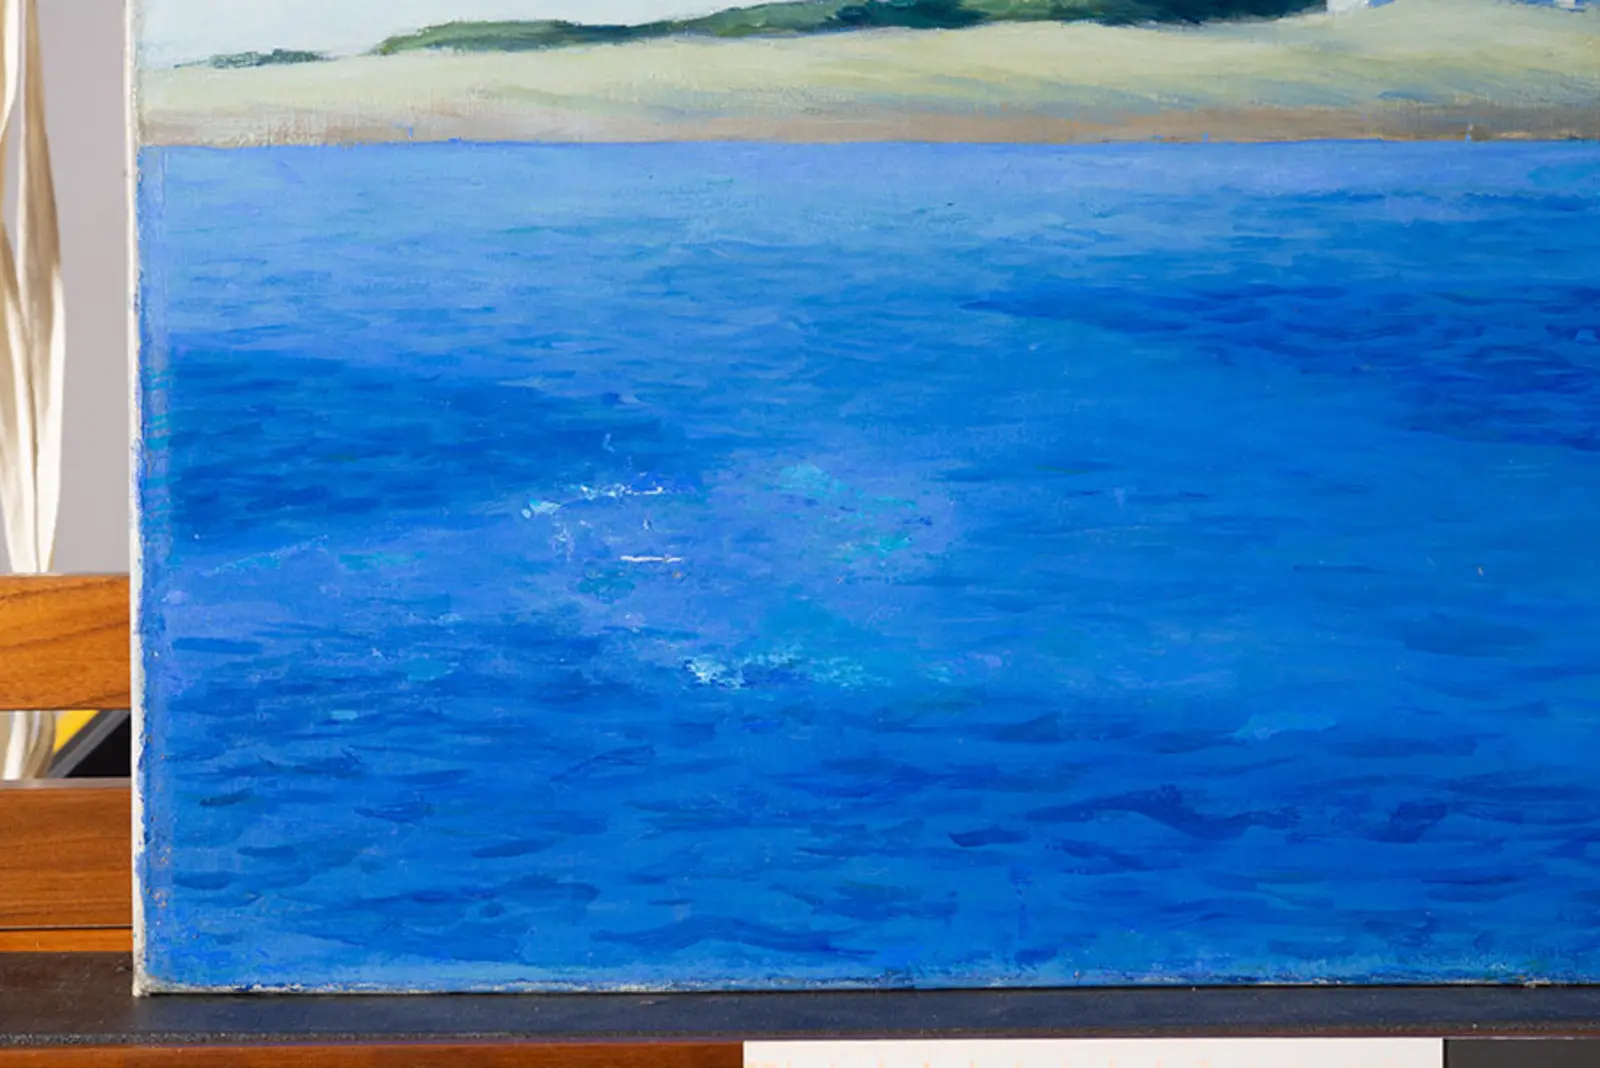 A section of a painting that shows blue ocean water with a shore of land in the background.